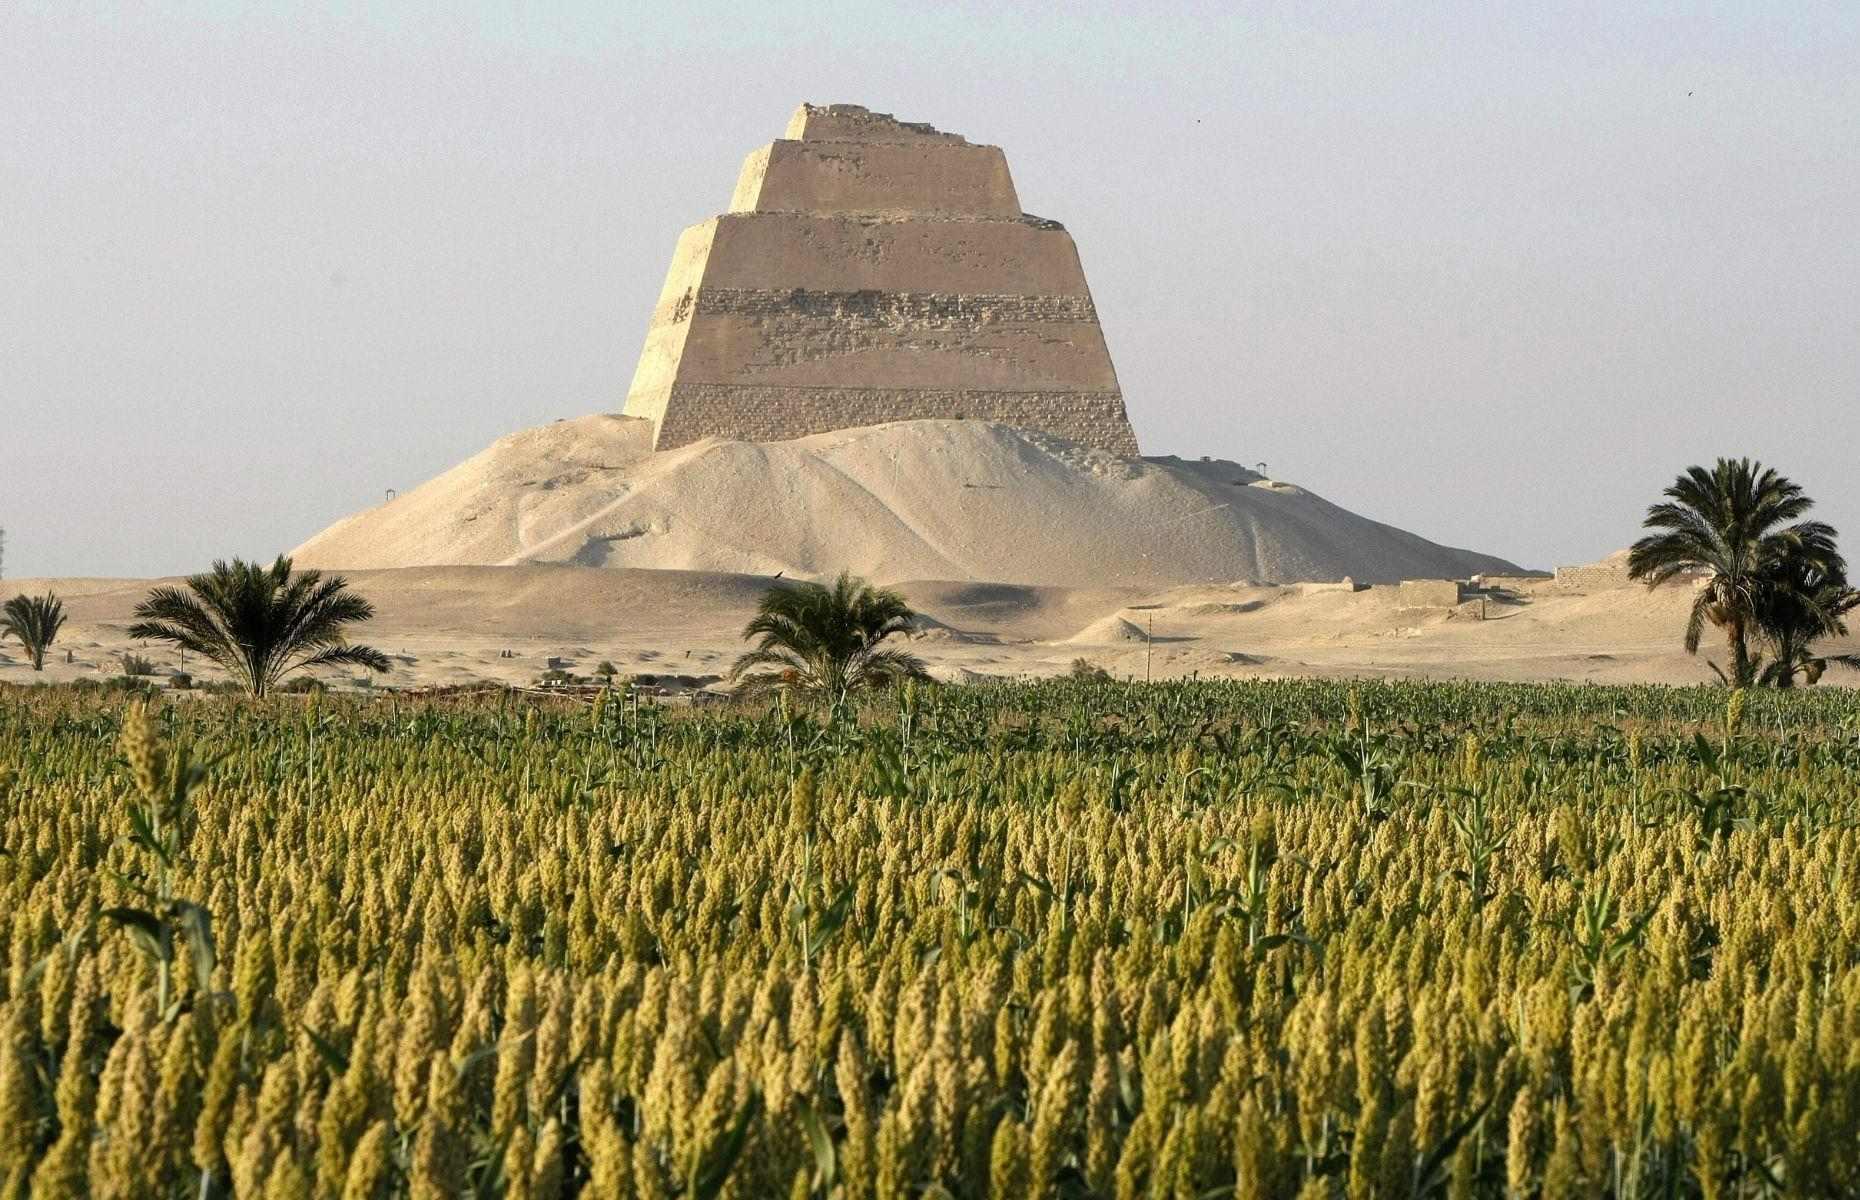 <p>Located roughly 62 miles (99km) from Cairo, the Meidum Pyramid was built during the reign of King Sneferu, the first pharaoh of the 4th dynasty (2613 to 2589 BC). The Meidum Pyramid was Egypt’s first straight-sided pyramid – affectionately said by some to resemble a sandcastle – and it's often described as a ‘false pyramid’. Numerous construction issues meant it was never completed, so its appearance is noticeably different to other Egyptian pyramids. </p>  <p><a href="https://www.loveexploring.com/gallerylist/90108/the-bent-pyramid-and-other-ancient-egyptian-mysteries"><strong>Learn more about the Bent Pyramid and other Ancient Egyptian mysteries</strong></a></p>